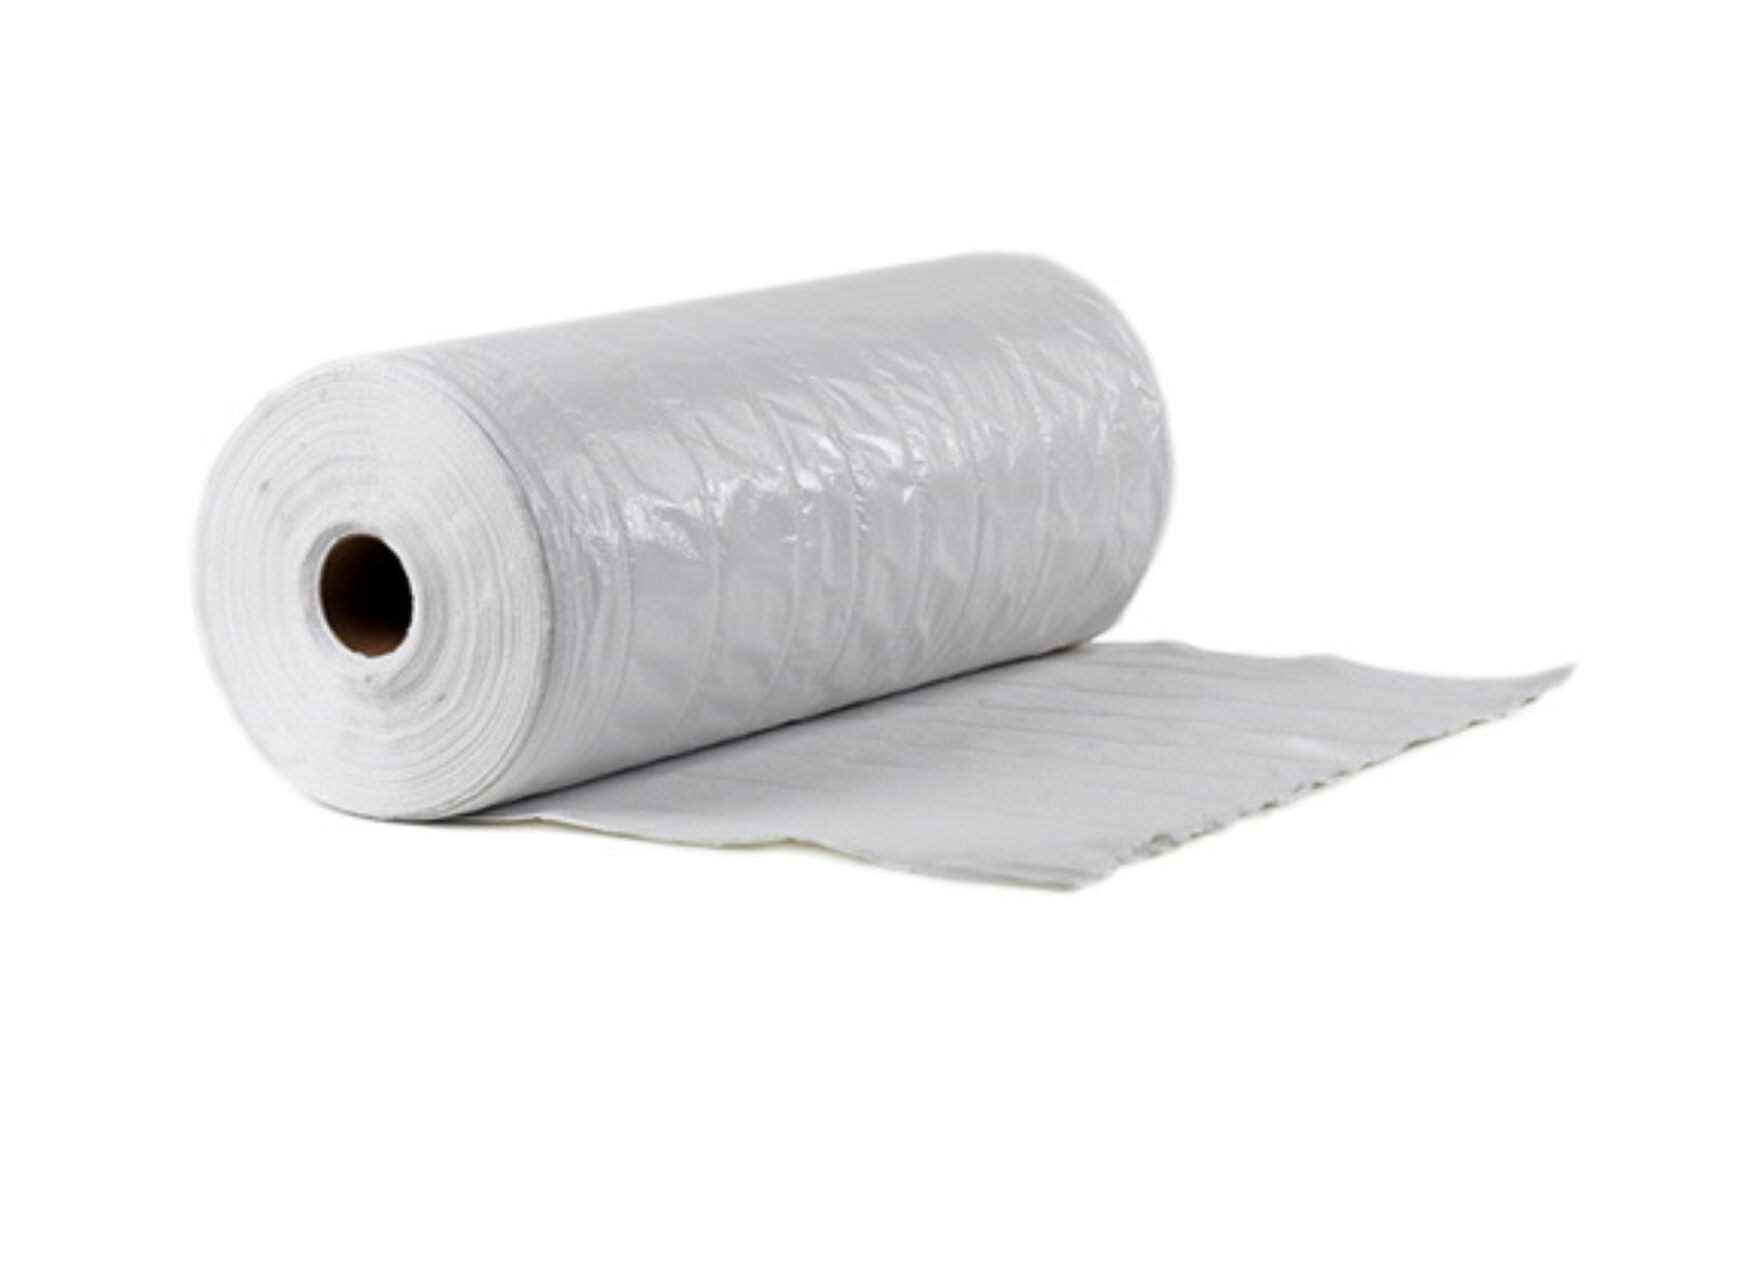 A large absorbent pad that quickly absorbs leaks and spills.